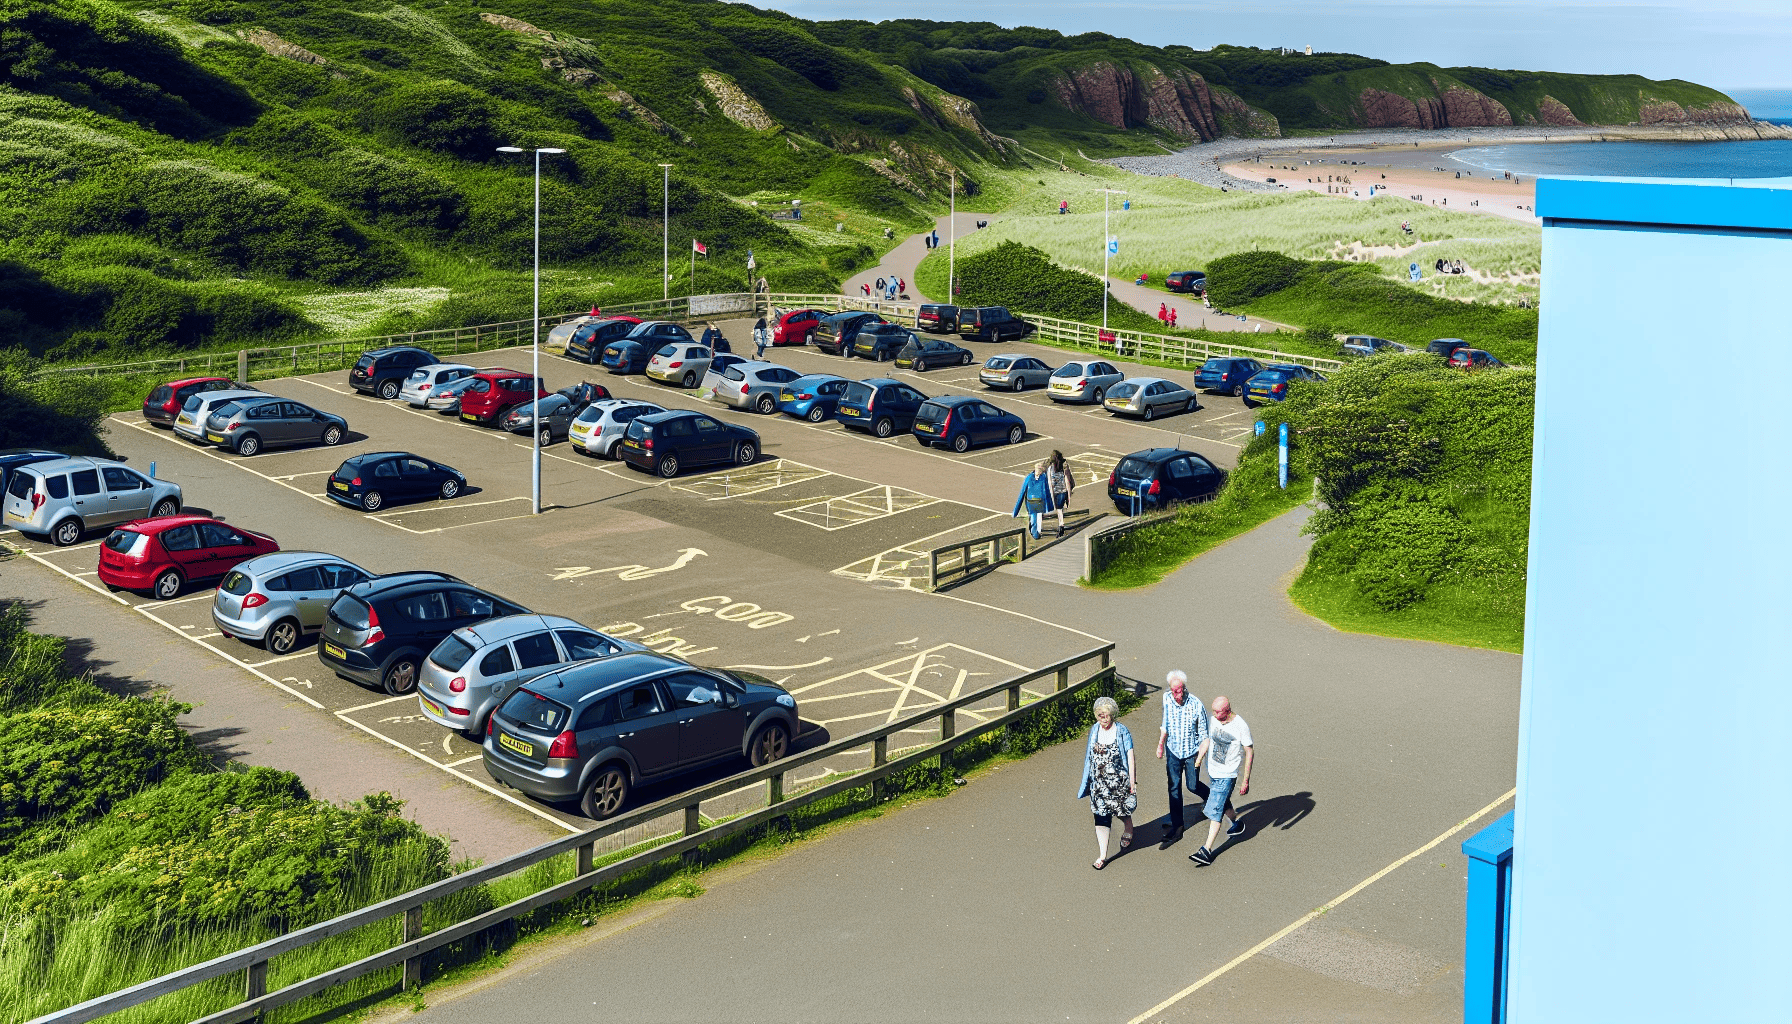 Access and parking options at Whitepark Bay beach